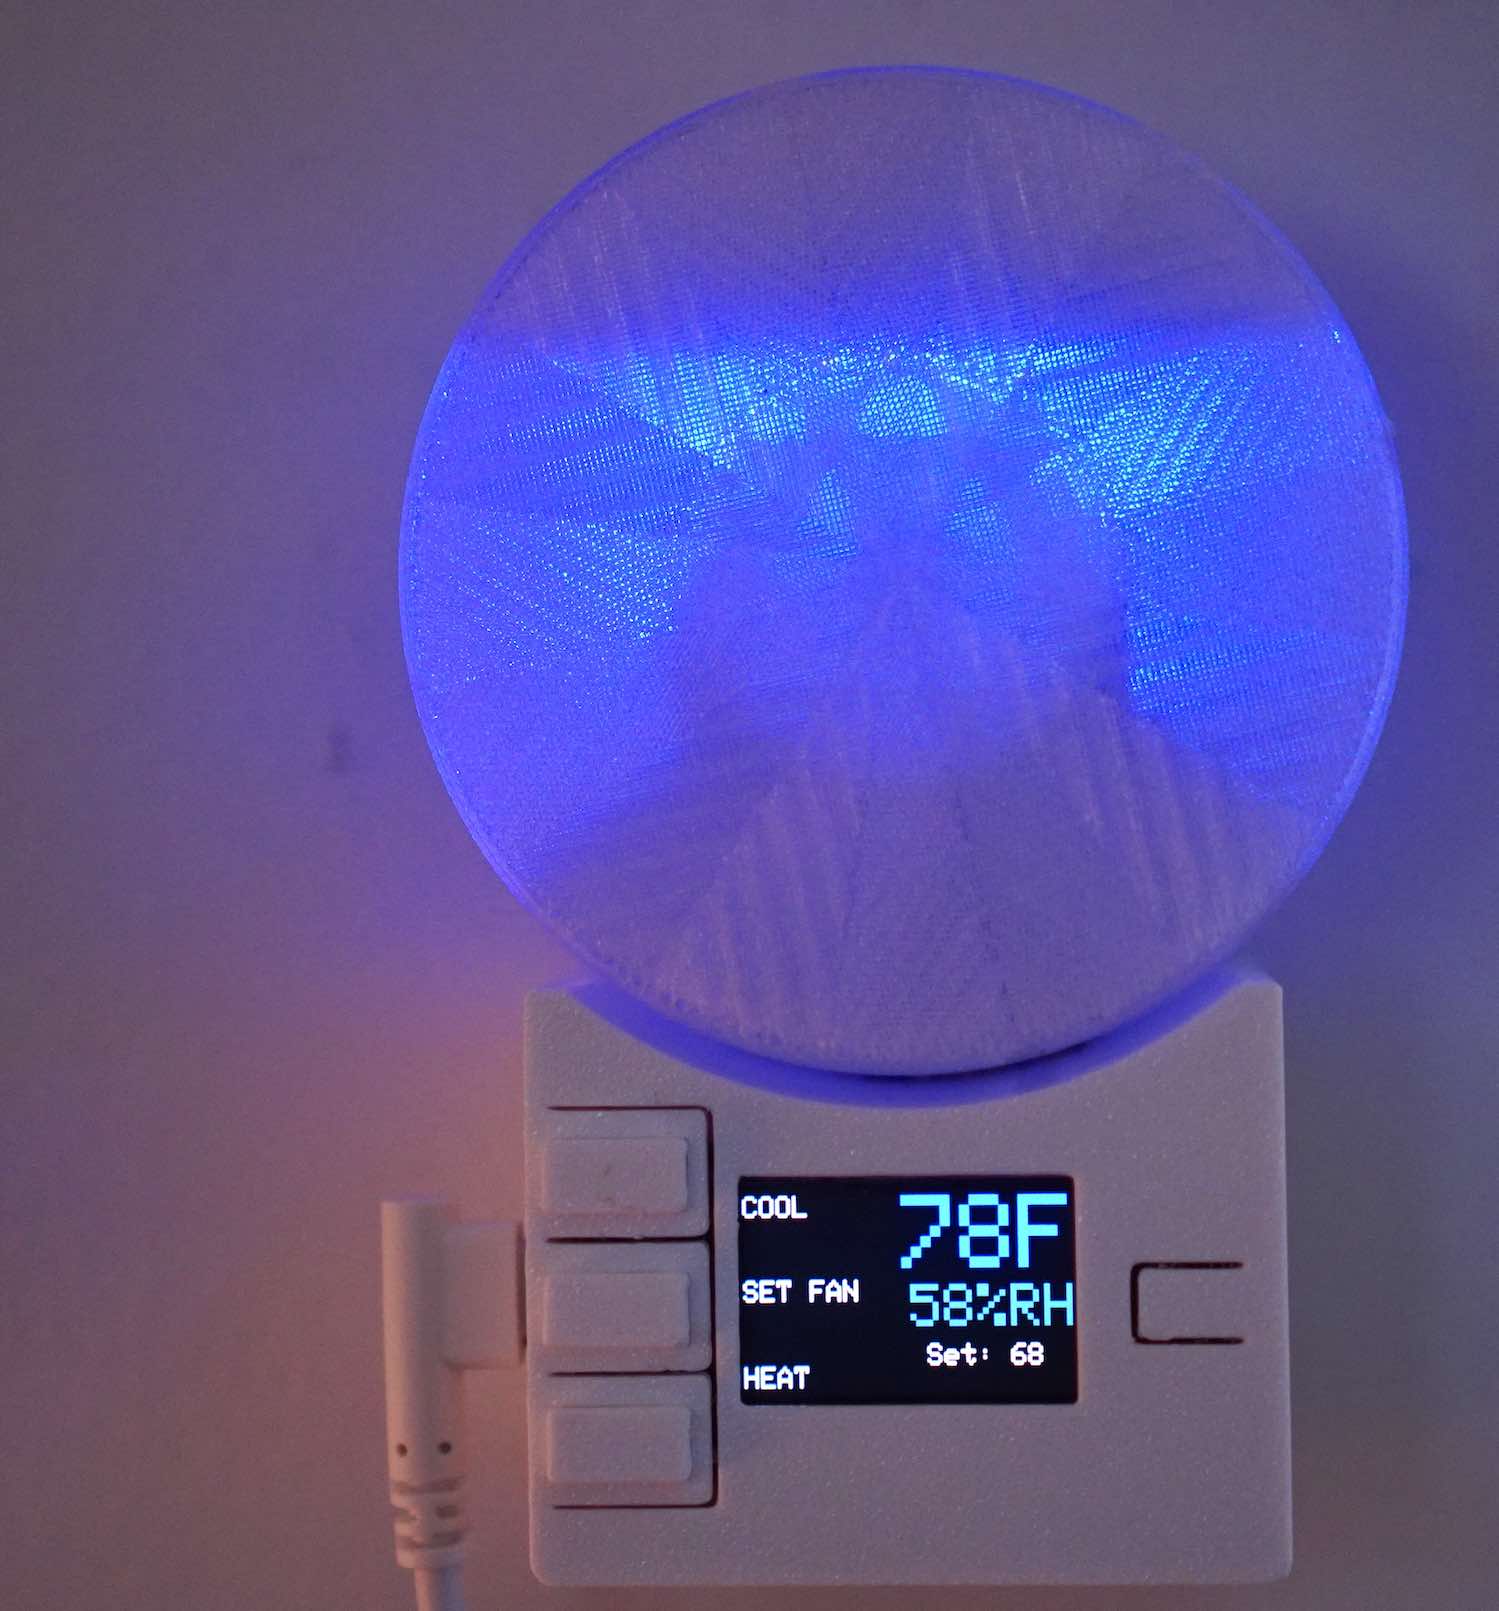 A thermostat-like thing, fully-custom made by me